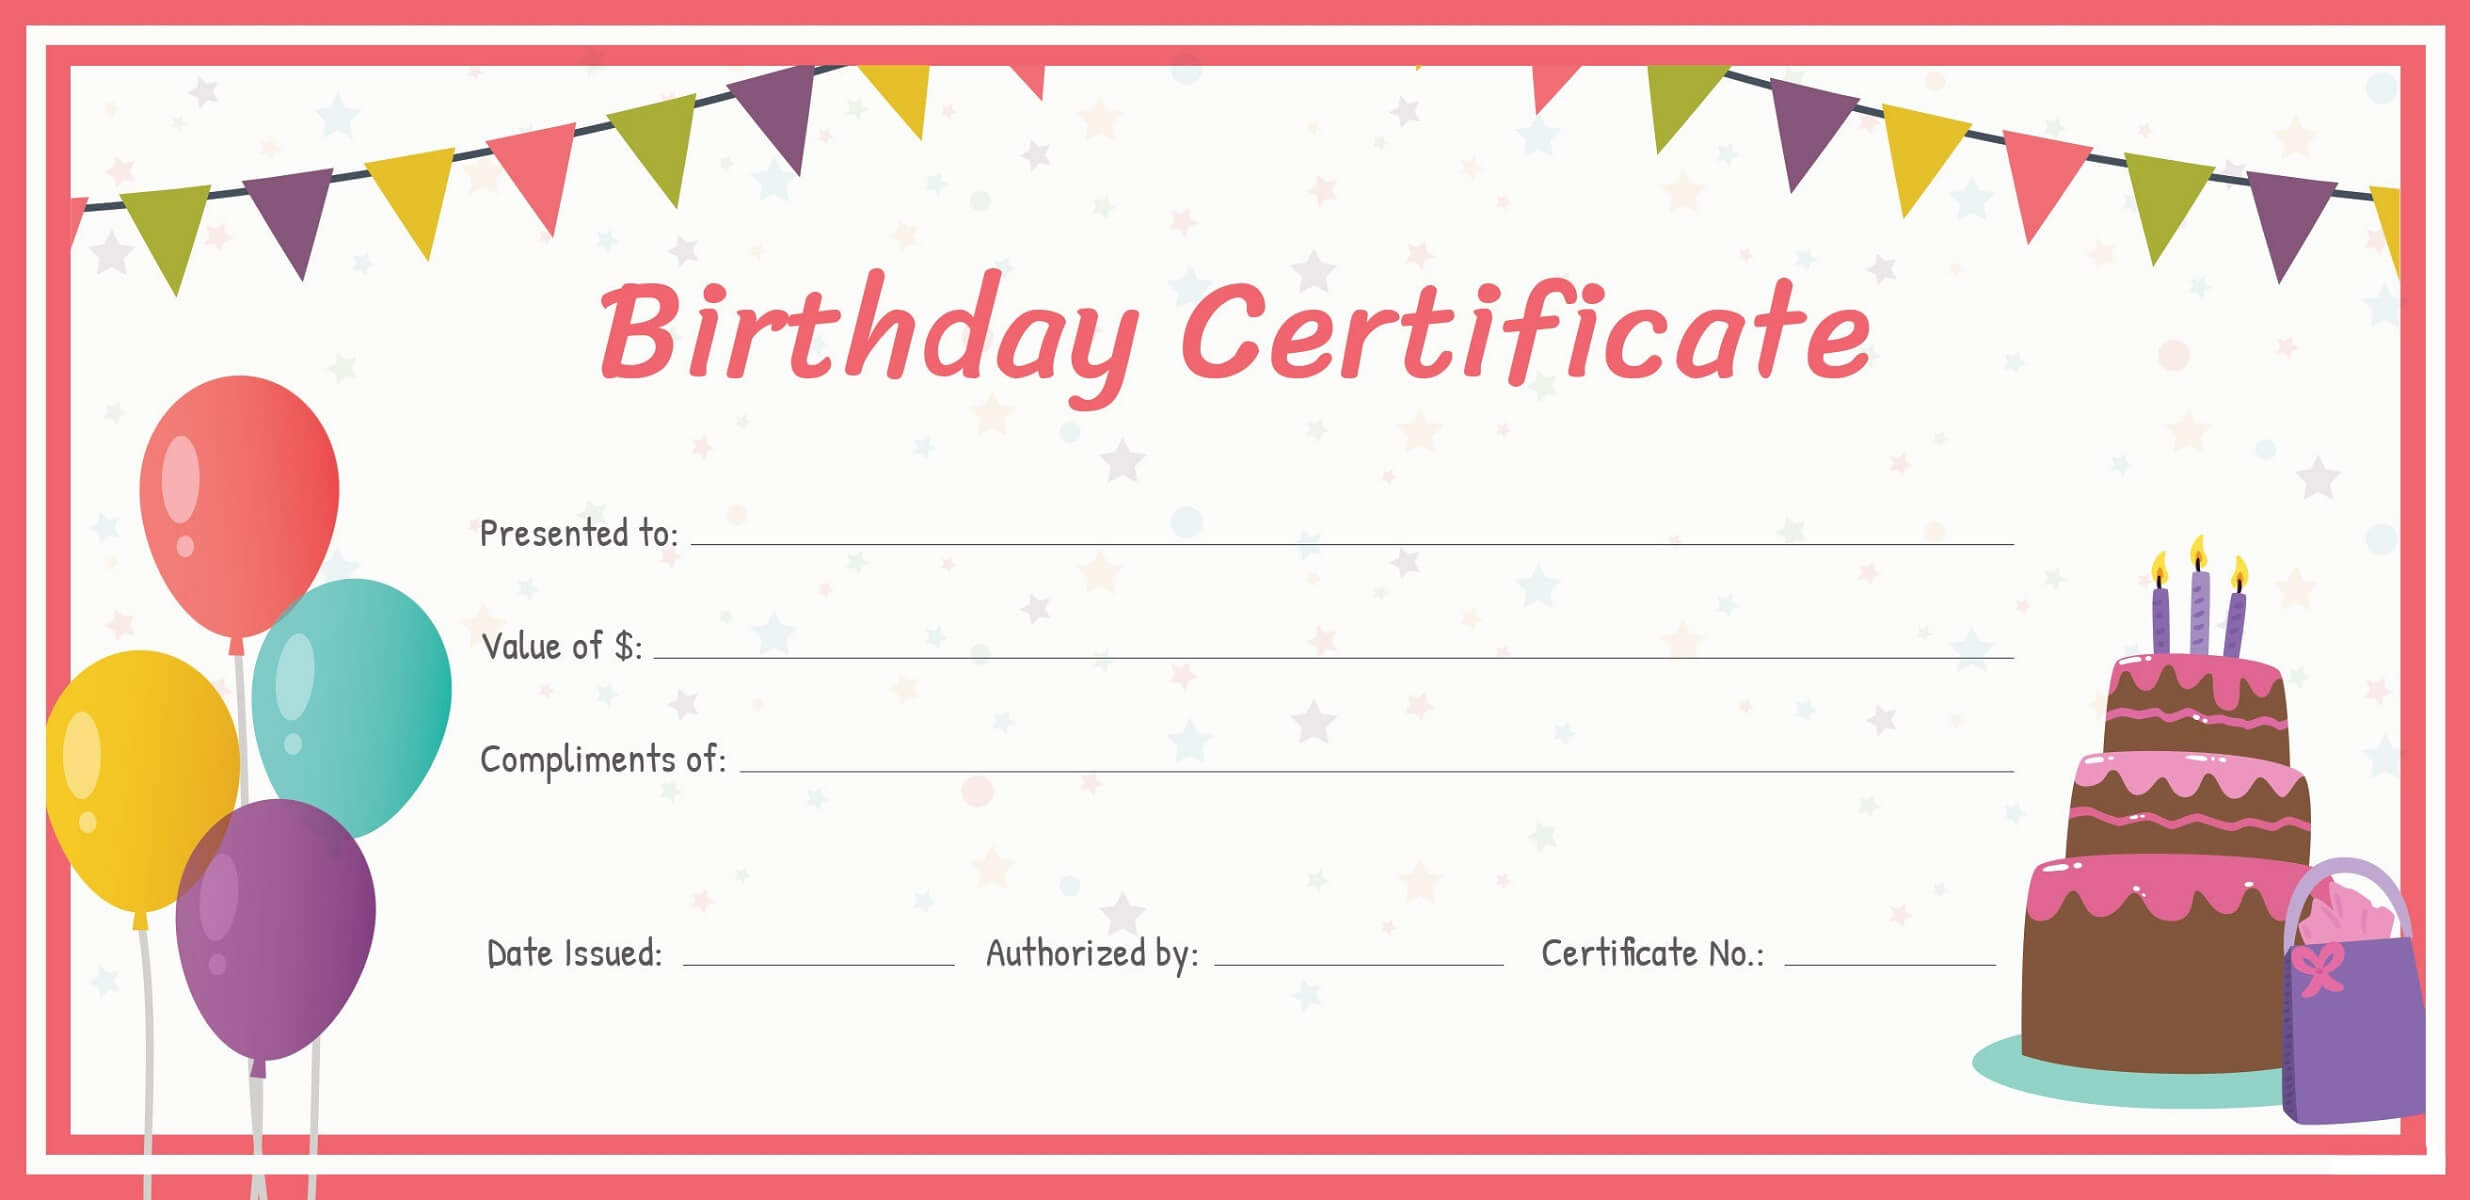 Gift Certificate Templates To Print For Free | 101 Activity With